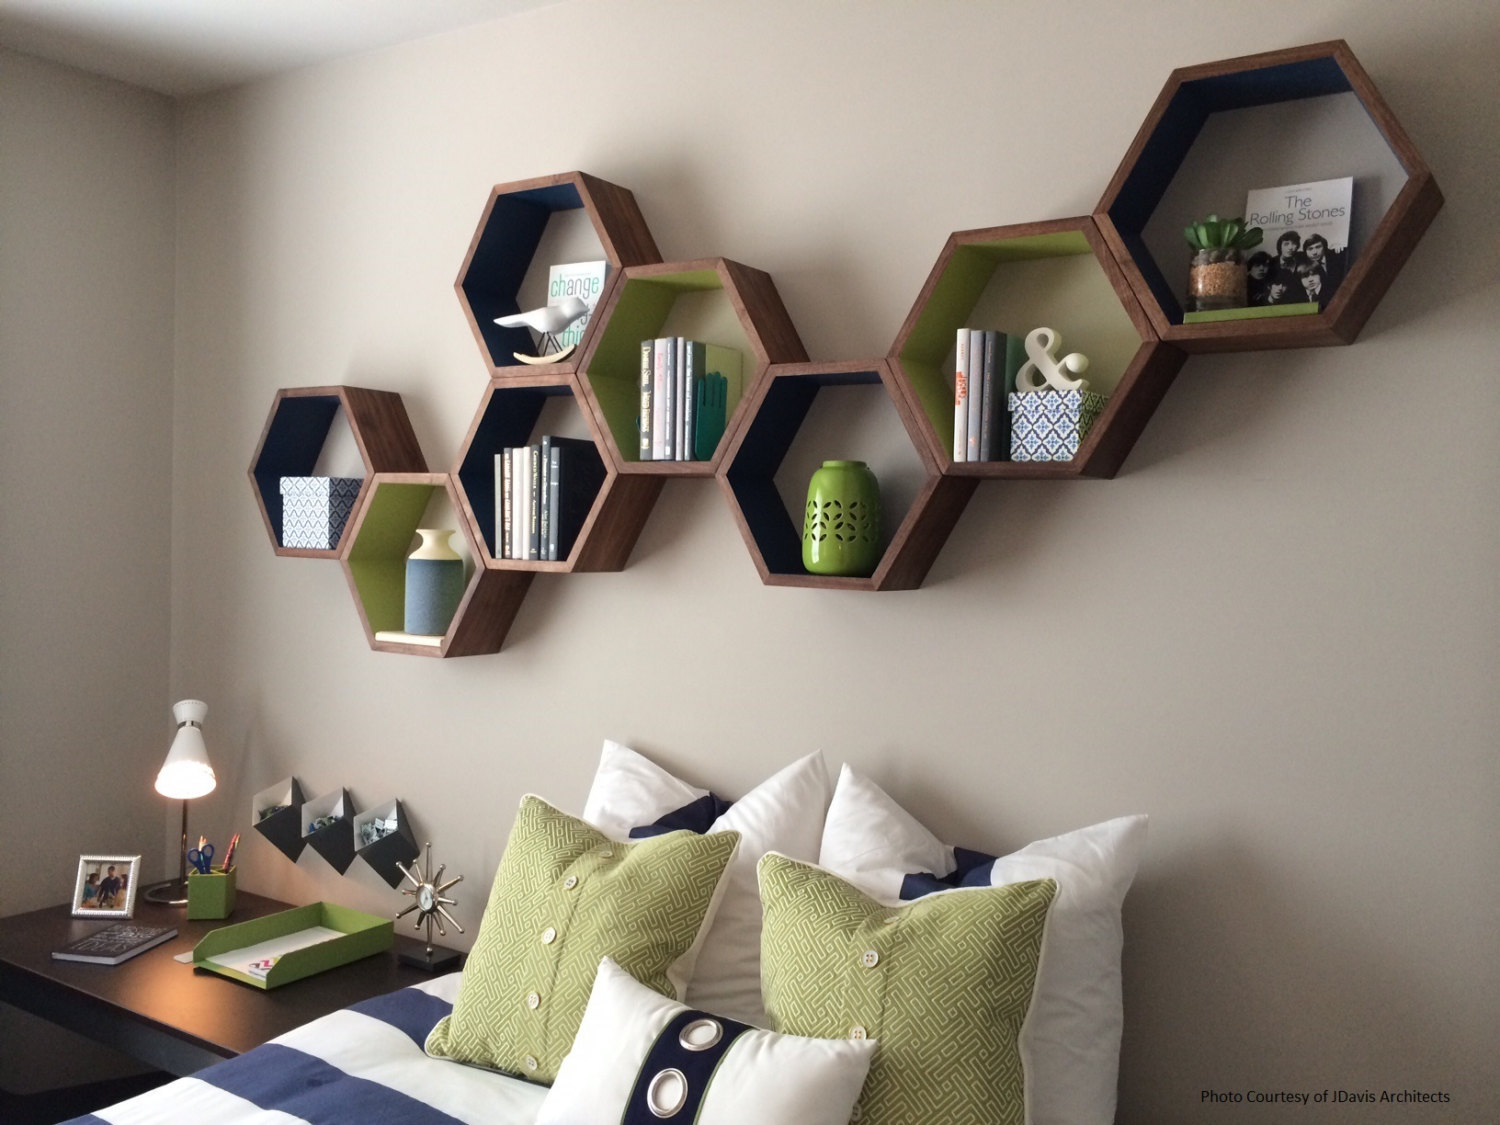 Creative Wall Decor: Transform Your Room With A Unique And Eye Catching Display